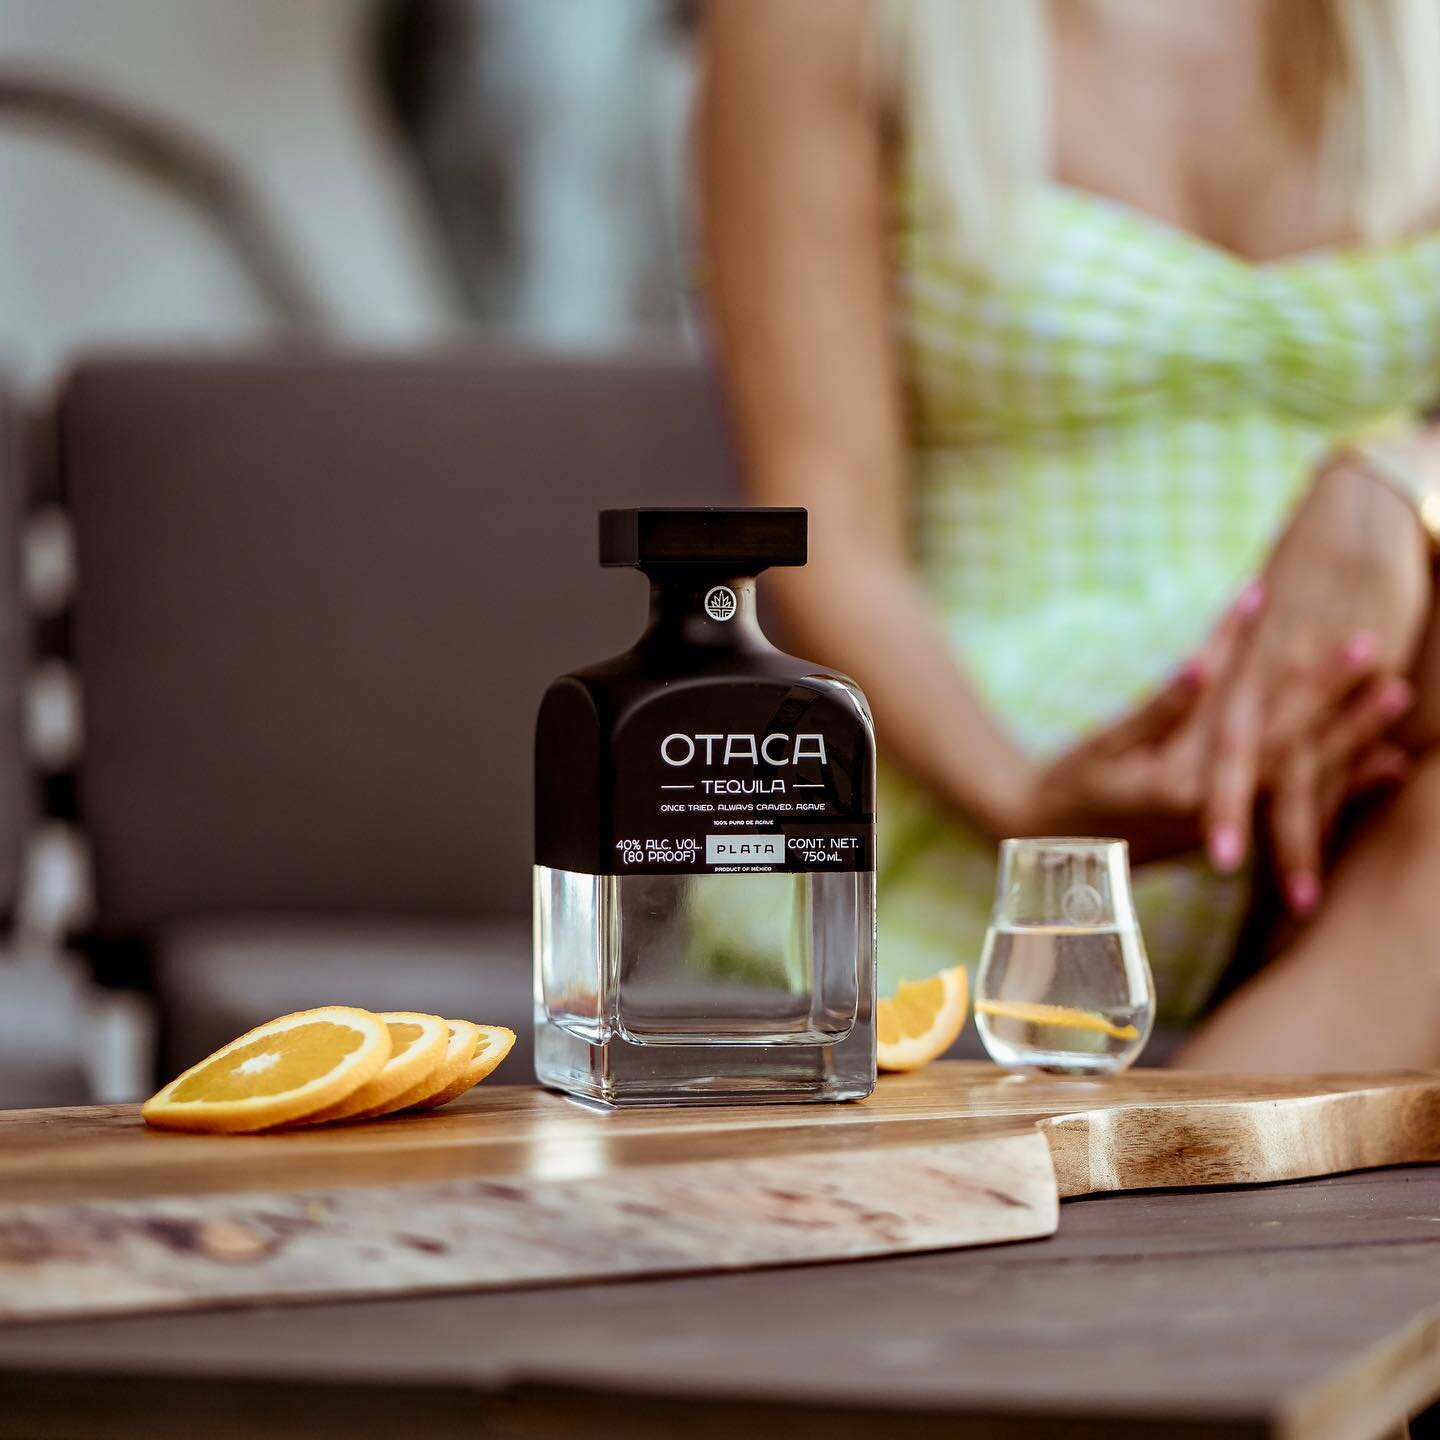 There are a lot of tequilas to choose from but there is only one that&rsquo;s Once Tried Always Craved @otaca_tequila #smooth #sipping #tequila #madeinmexico #oncetriedalwayscraved